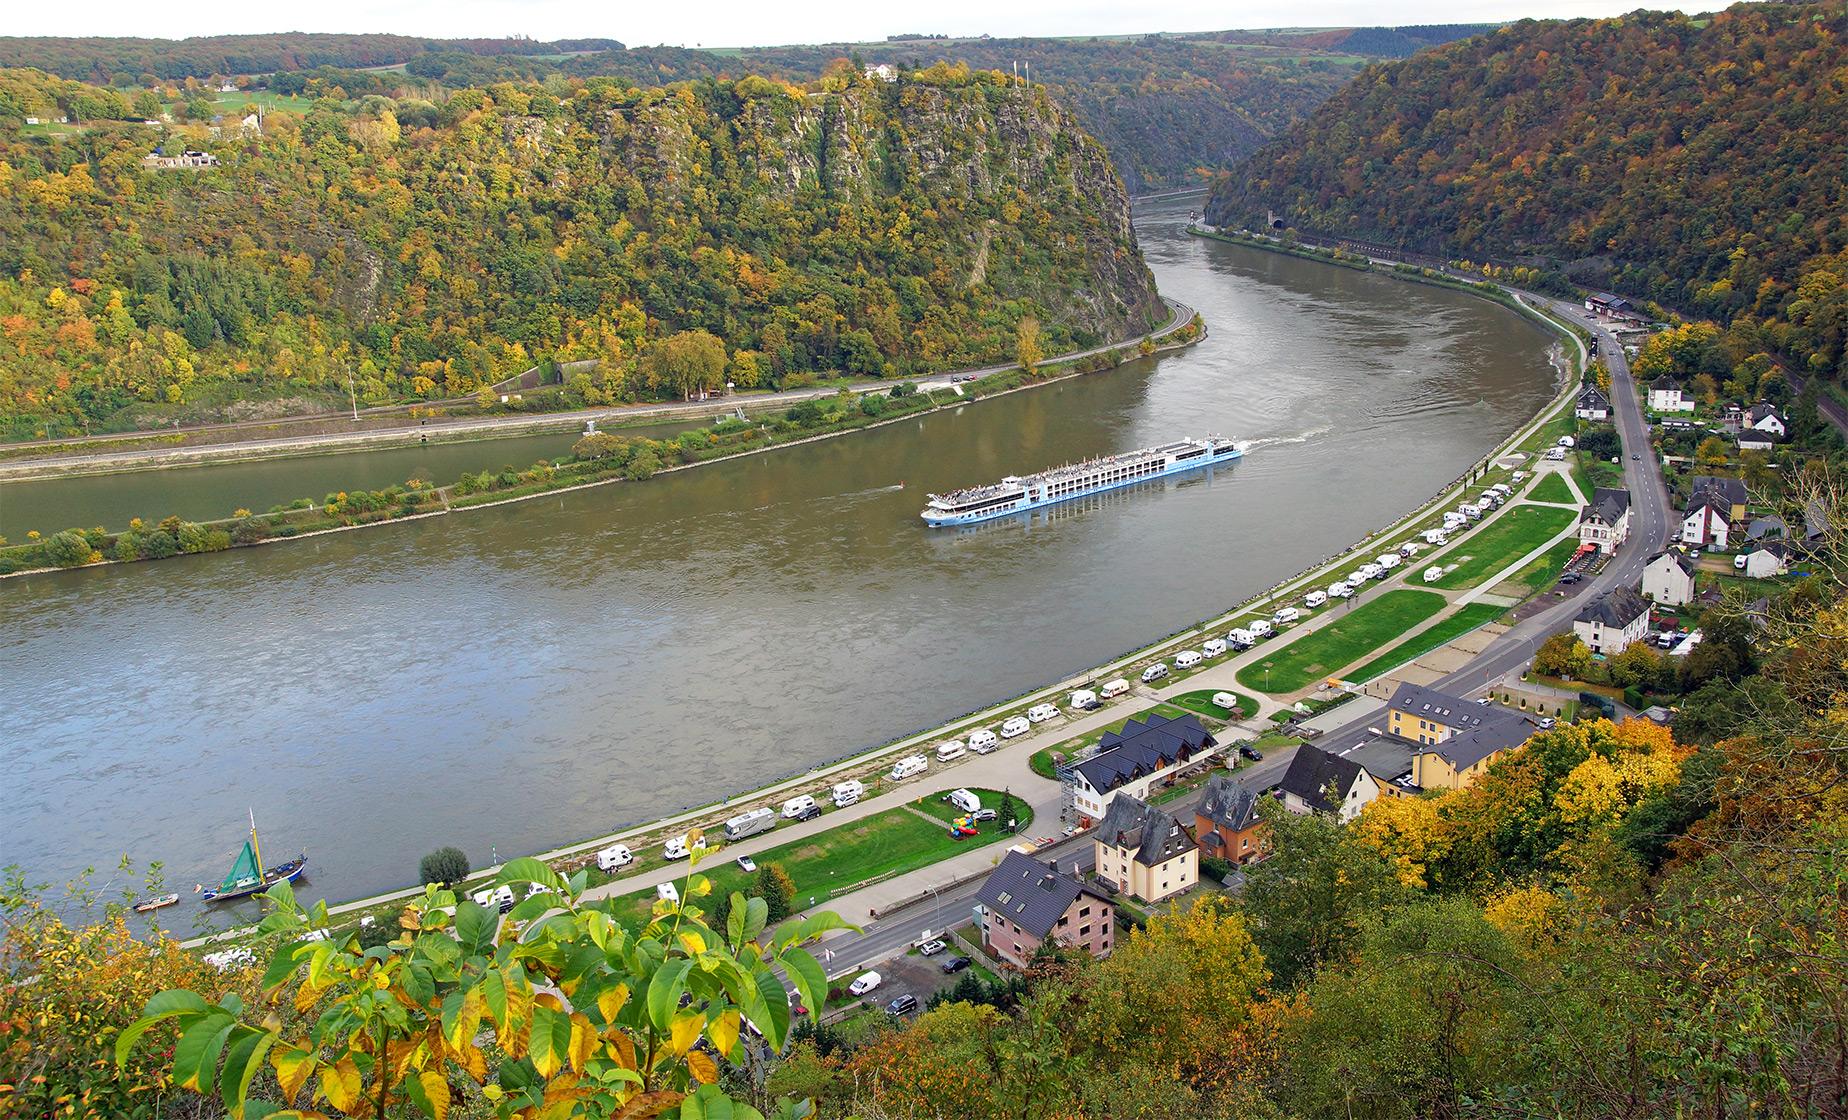 Sightseeing Cruise to St. Goar & Cable Car Combo